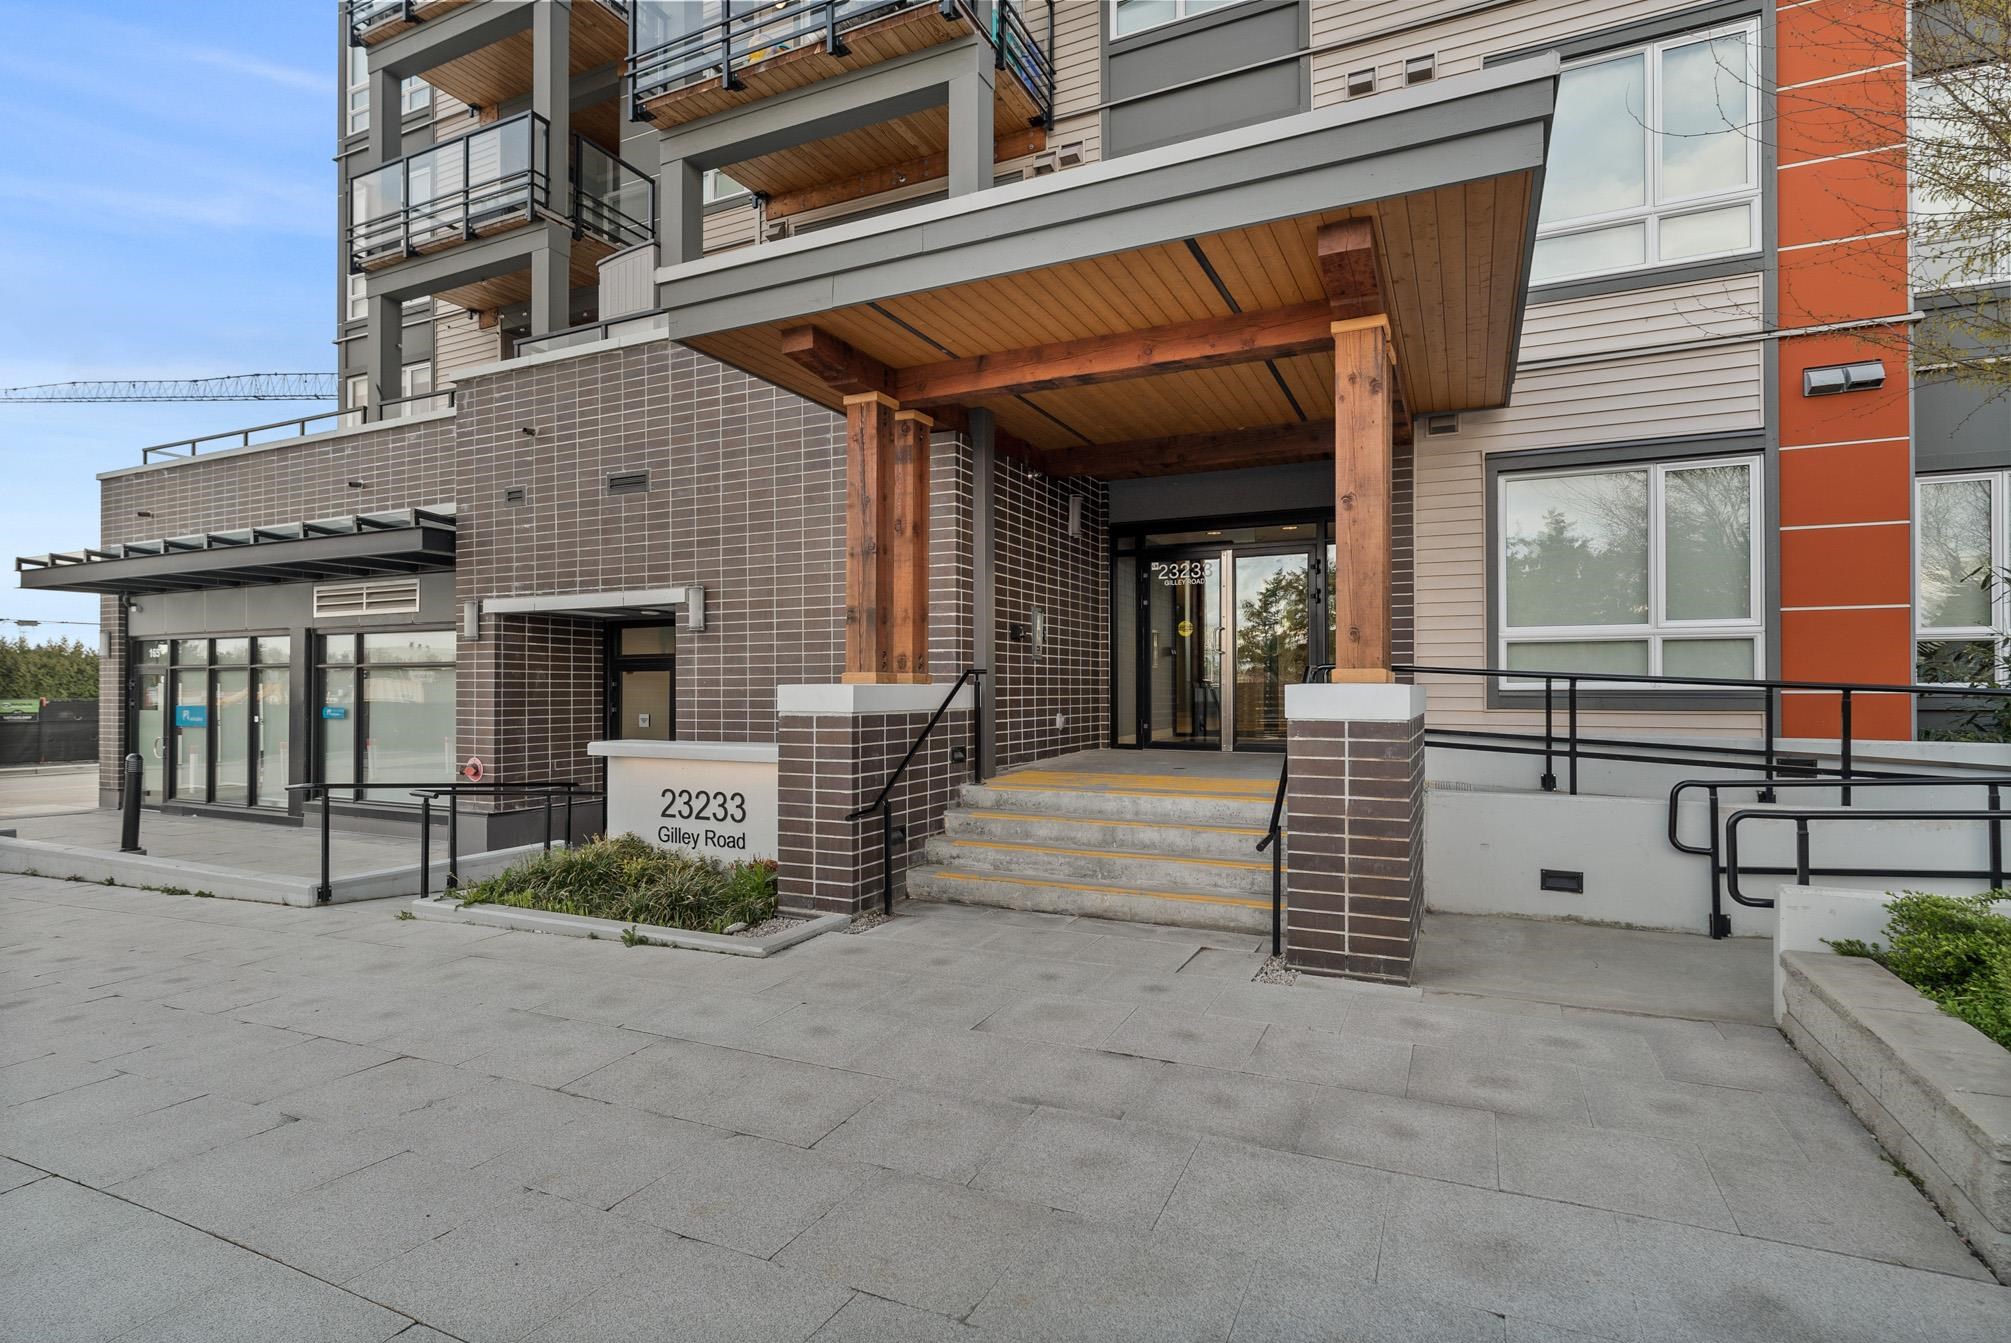 Wilson Lam Realtor, 217-23233 GILLEY ROAD, Richmond, British Columbia V6V 1E6, 1 Bedroom, 1 Bathroom, Residential Attached,For Sale ,R2769718